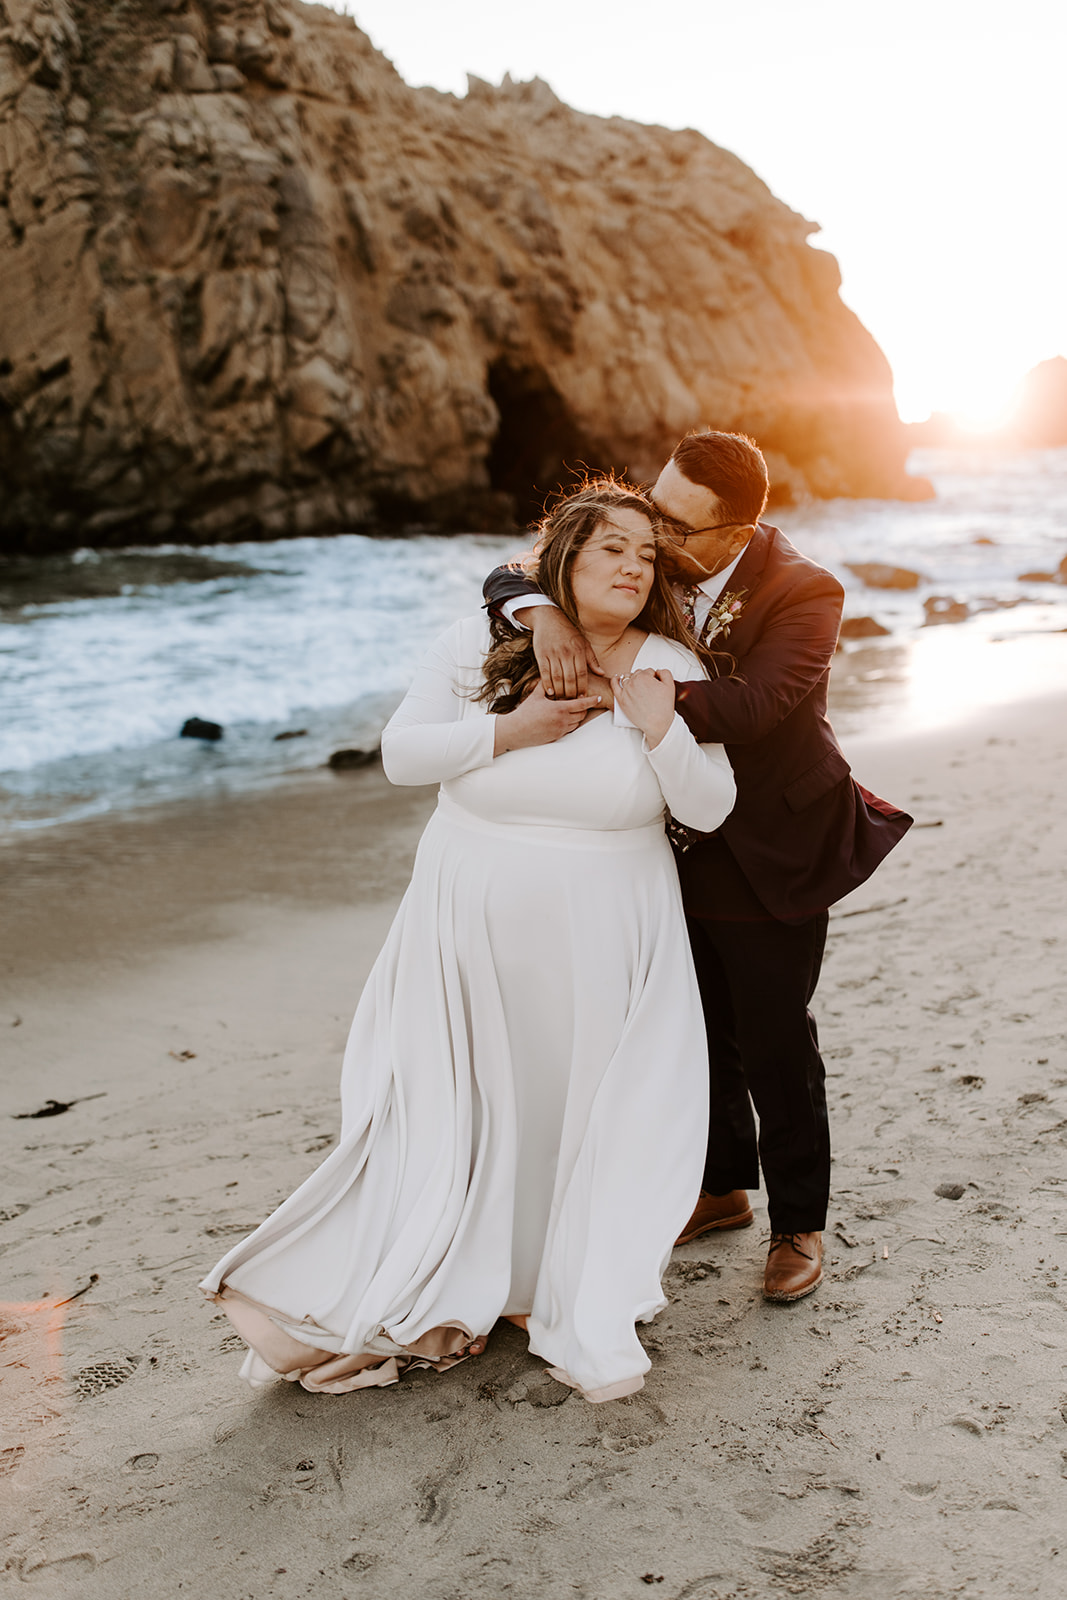 Couple who eloped in Big Sur have portraits at Julia Pfeiffer Burns State Park beach